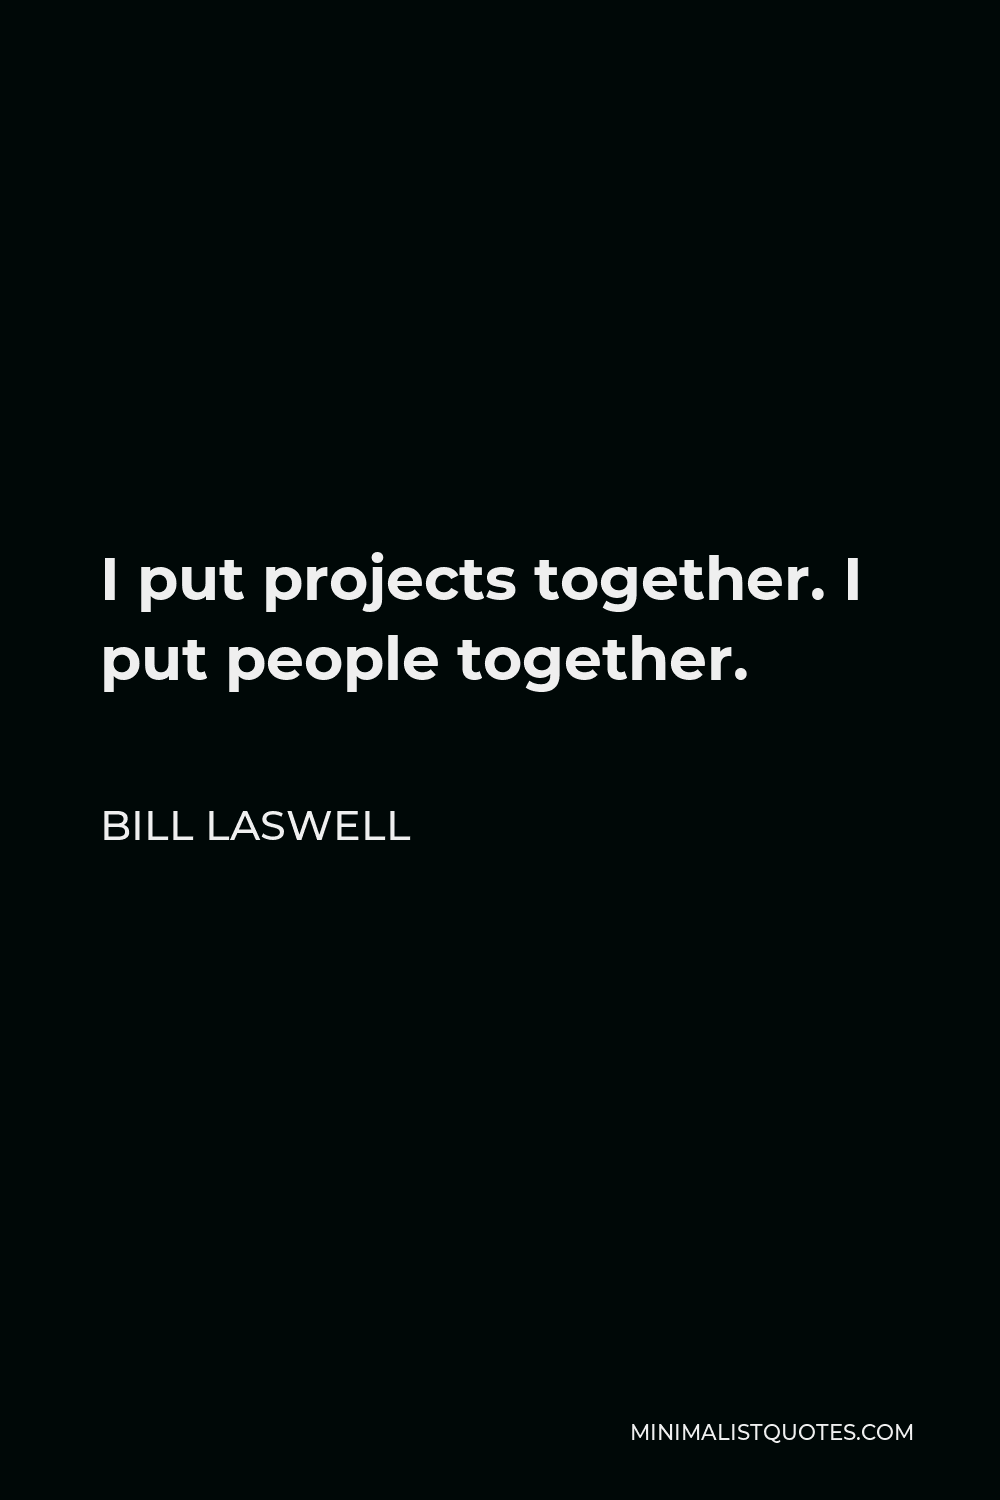 Bill Laswell Quote - I put projects together. I put people together.